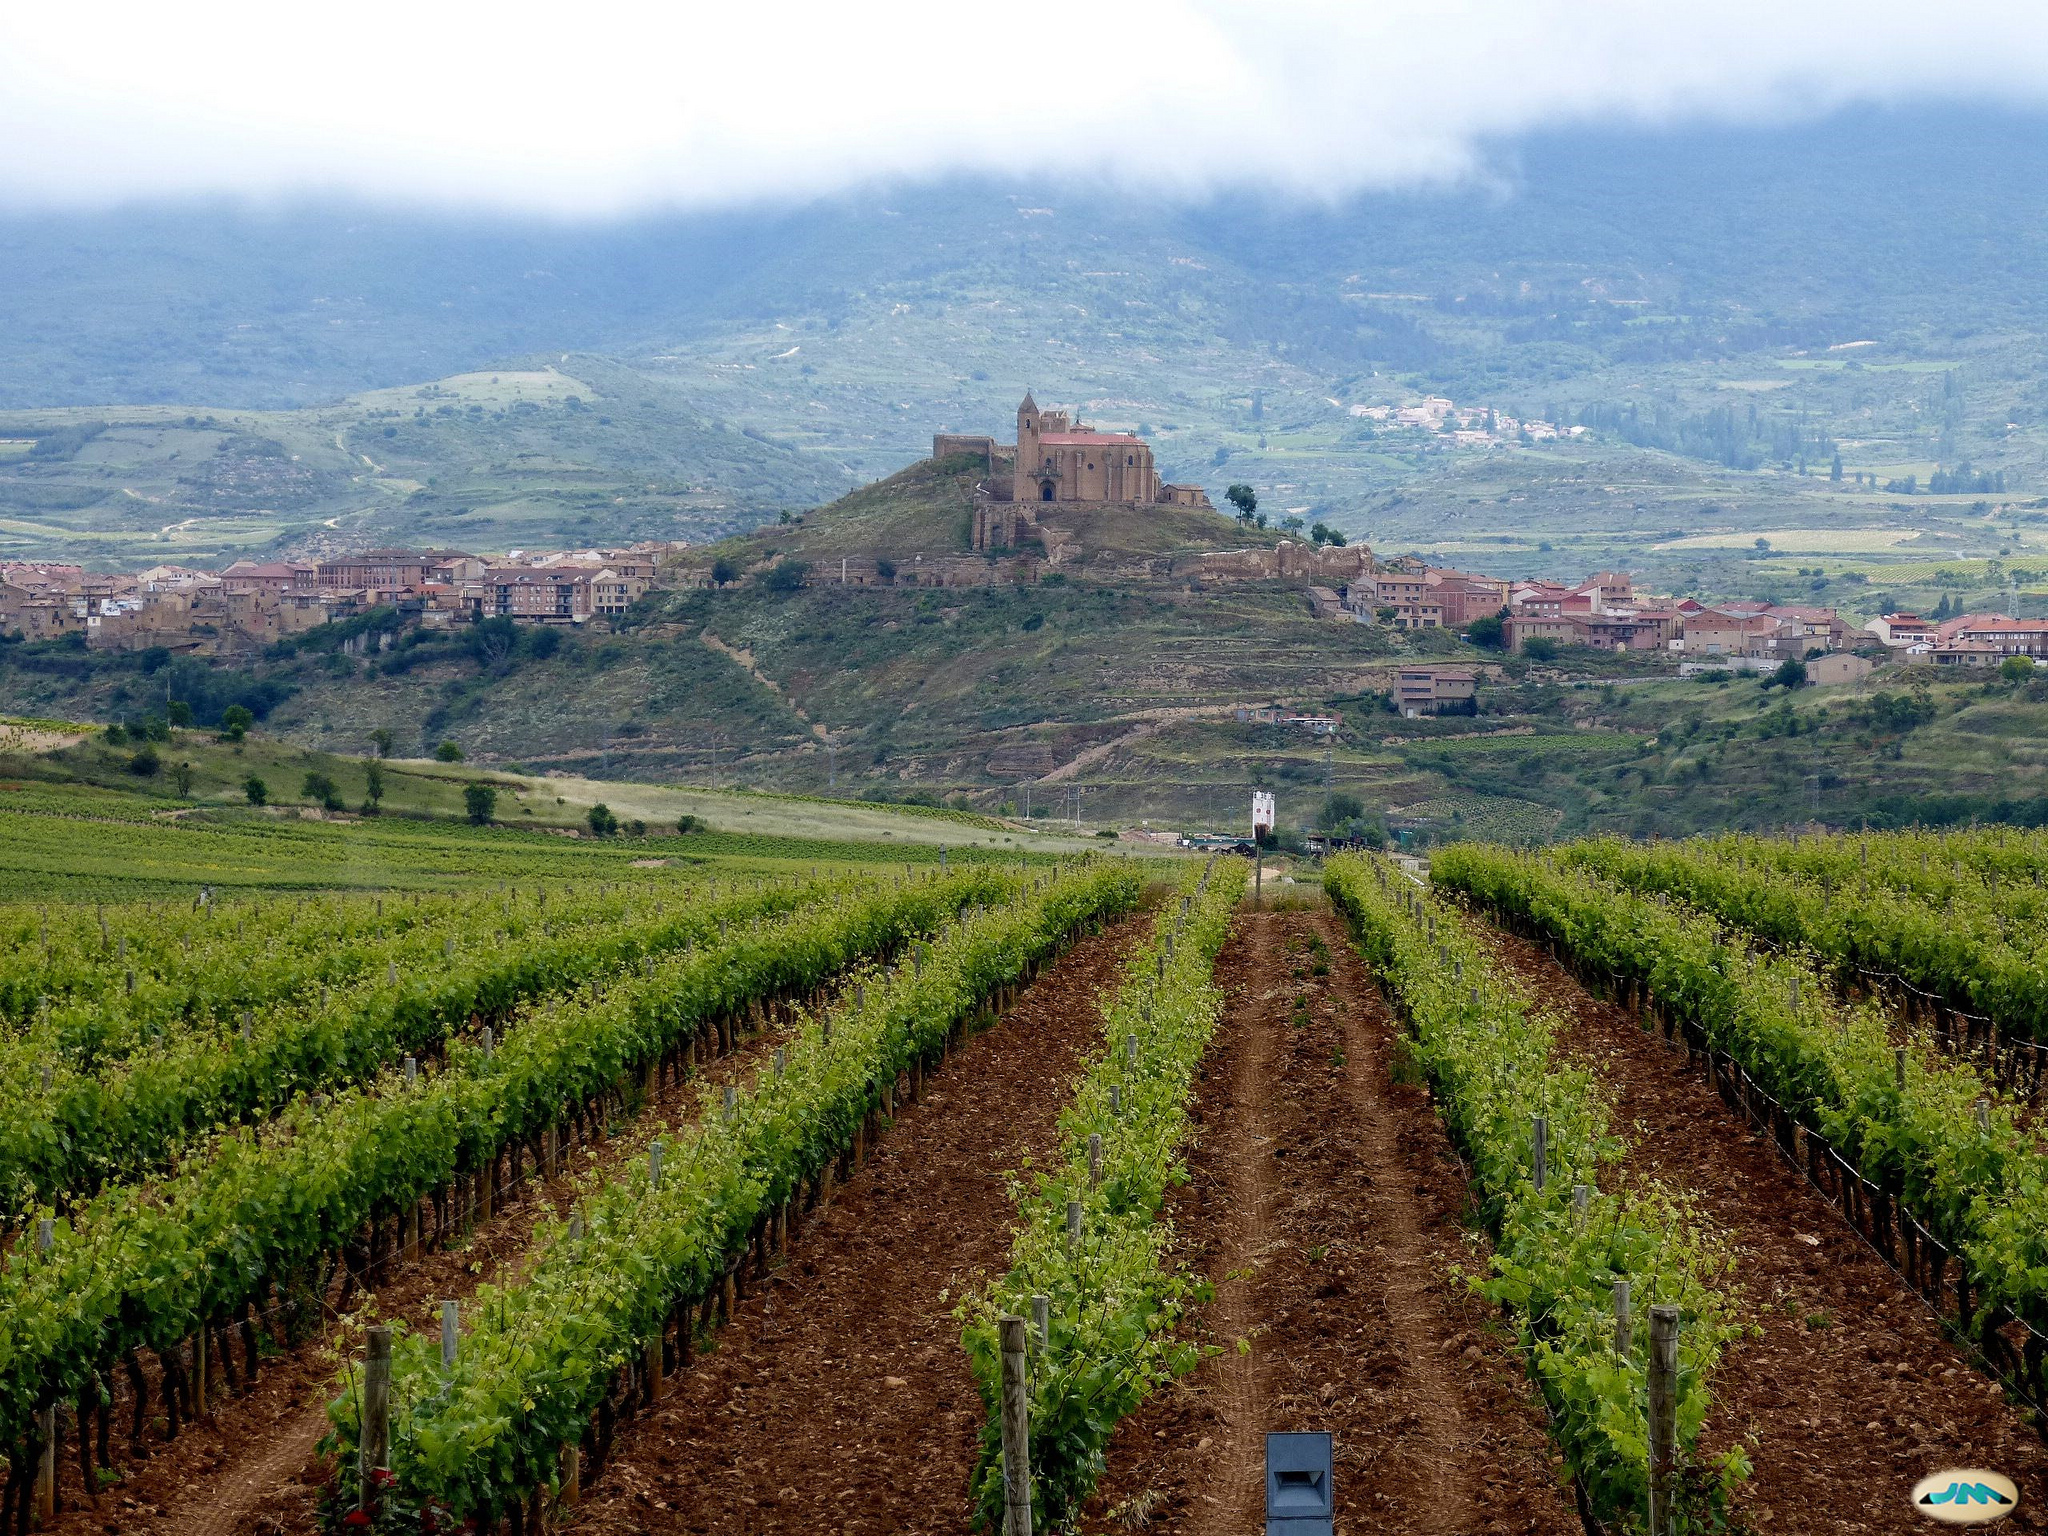 La Rioja vineyard with the village of Briones in the background